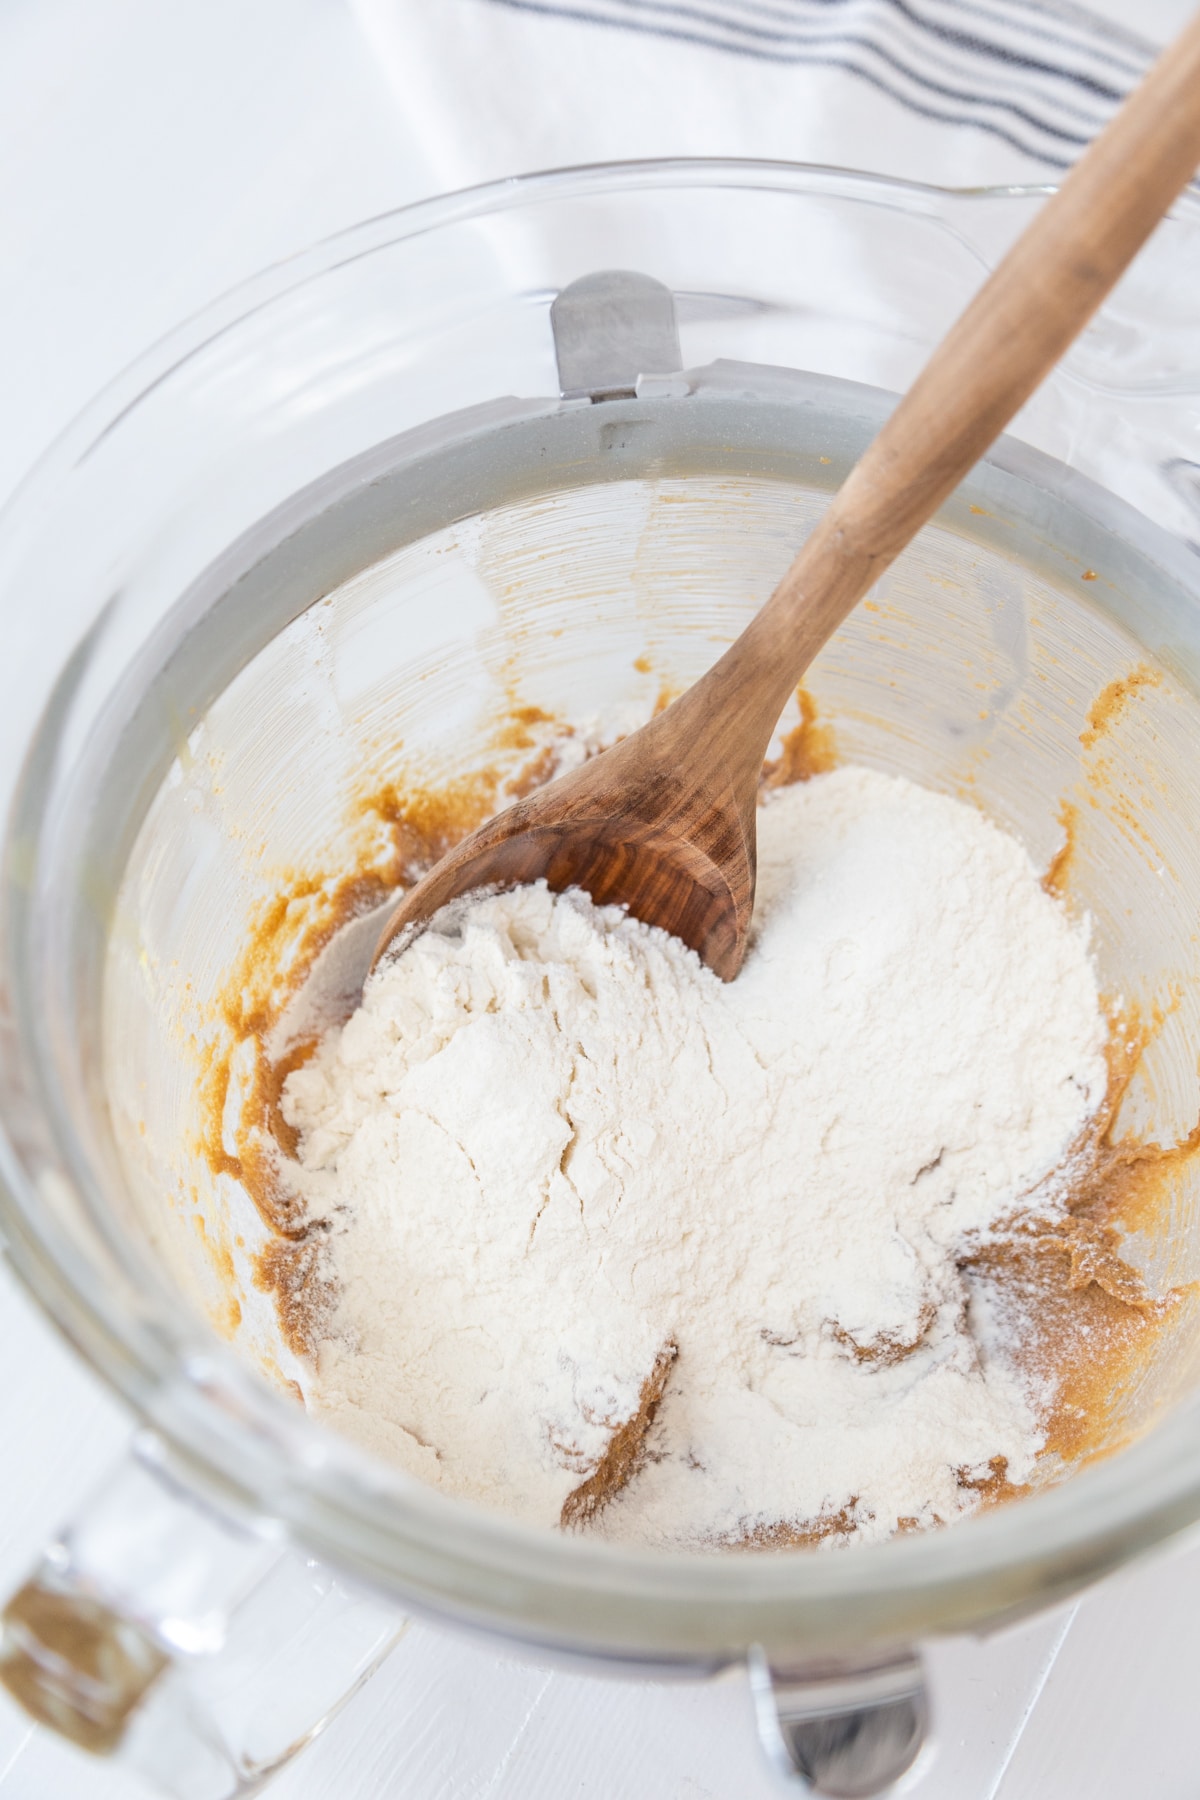 A glass mixing bowl with whipped butter and sugar and a wooden spoon stirring in the flour.